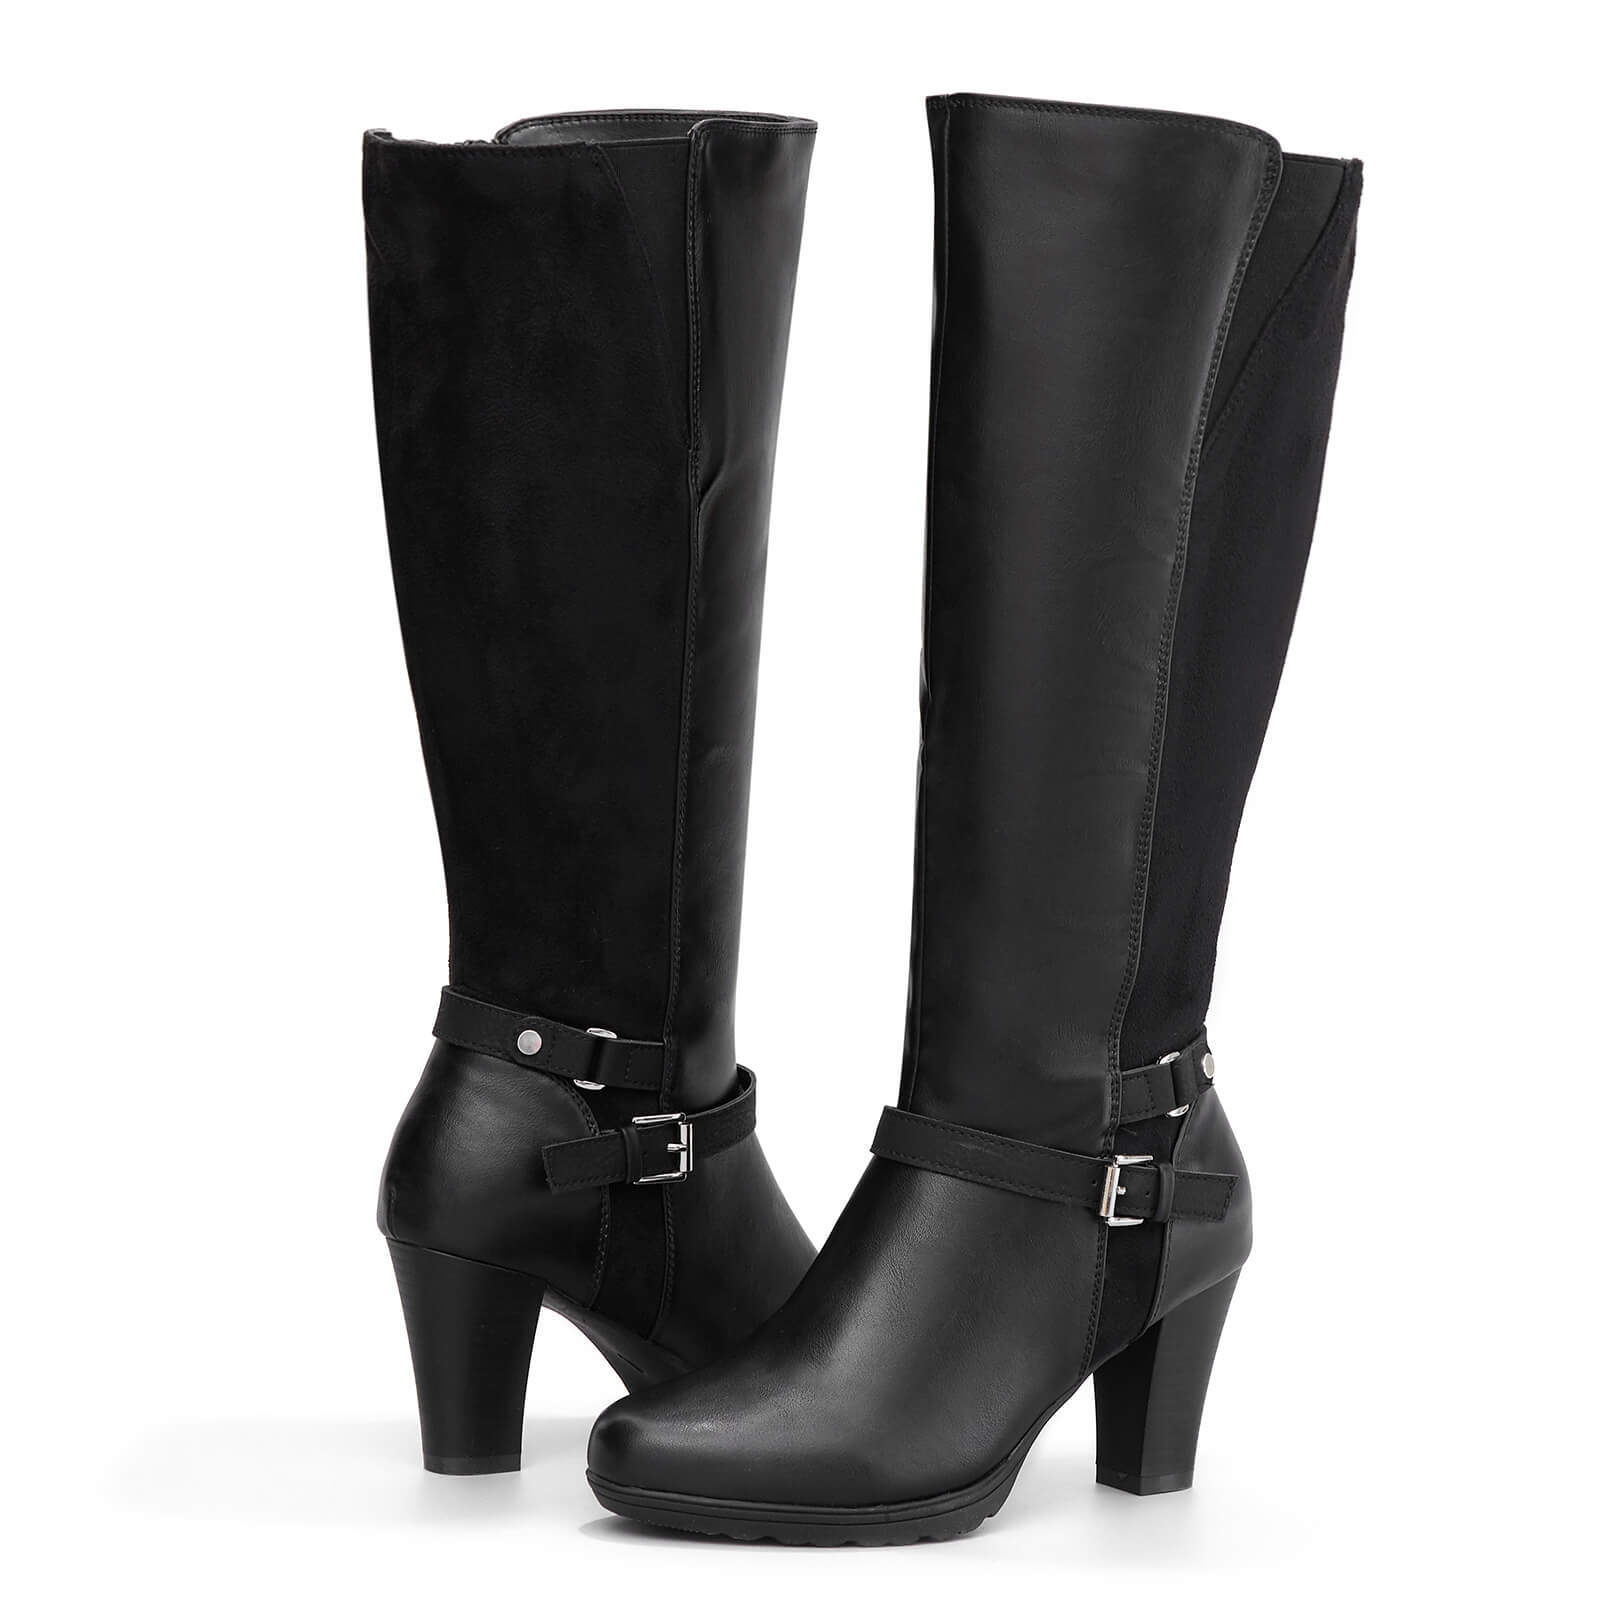 Black Knee High Suede Leather Boots